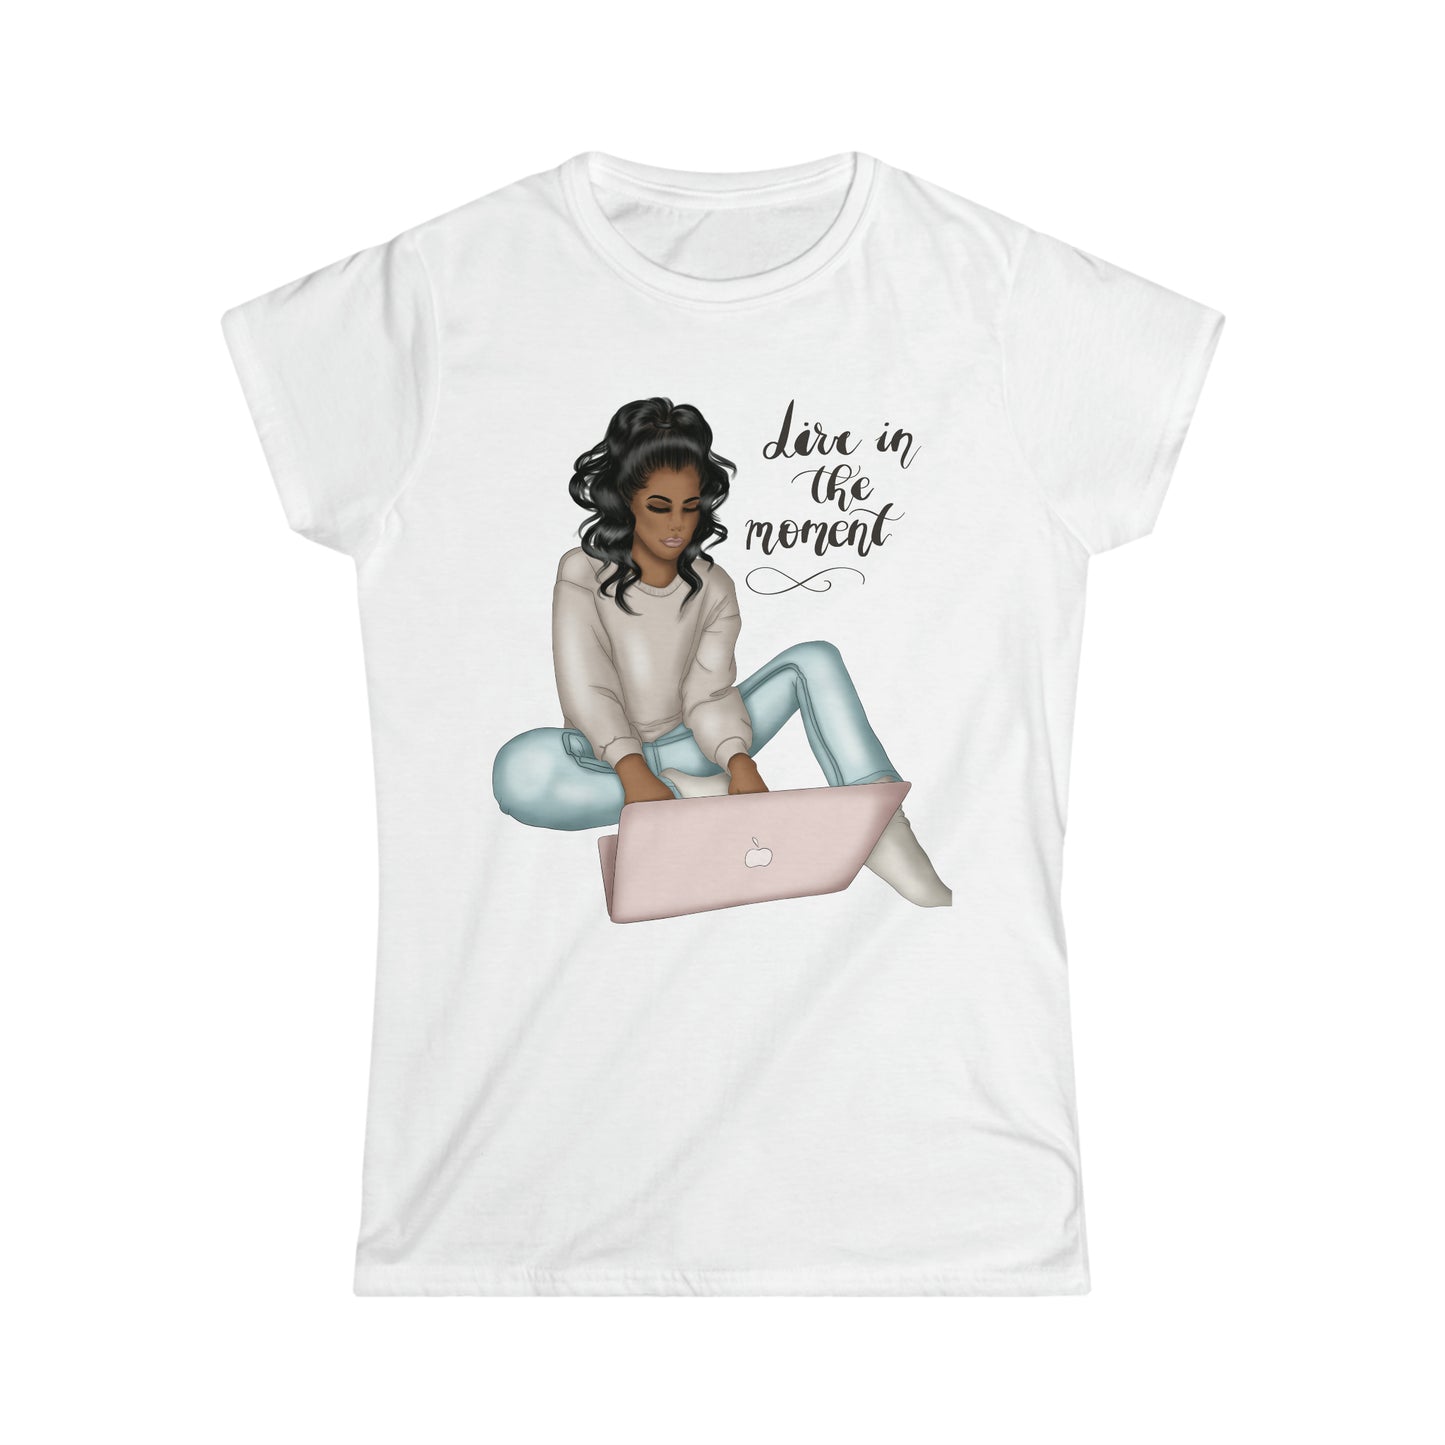 Dive In The Moment Tee - Black Hair